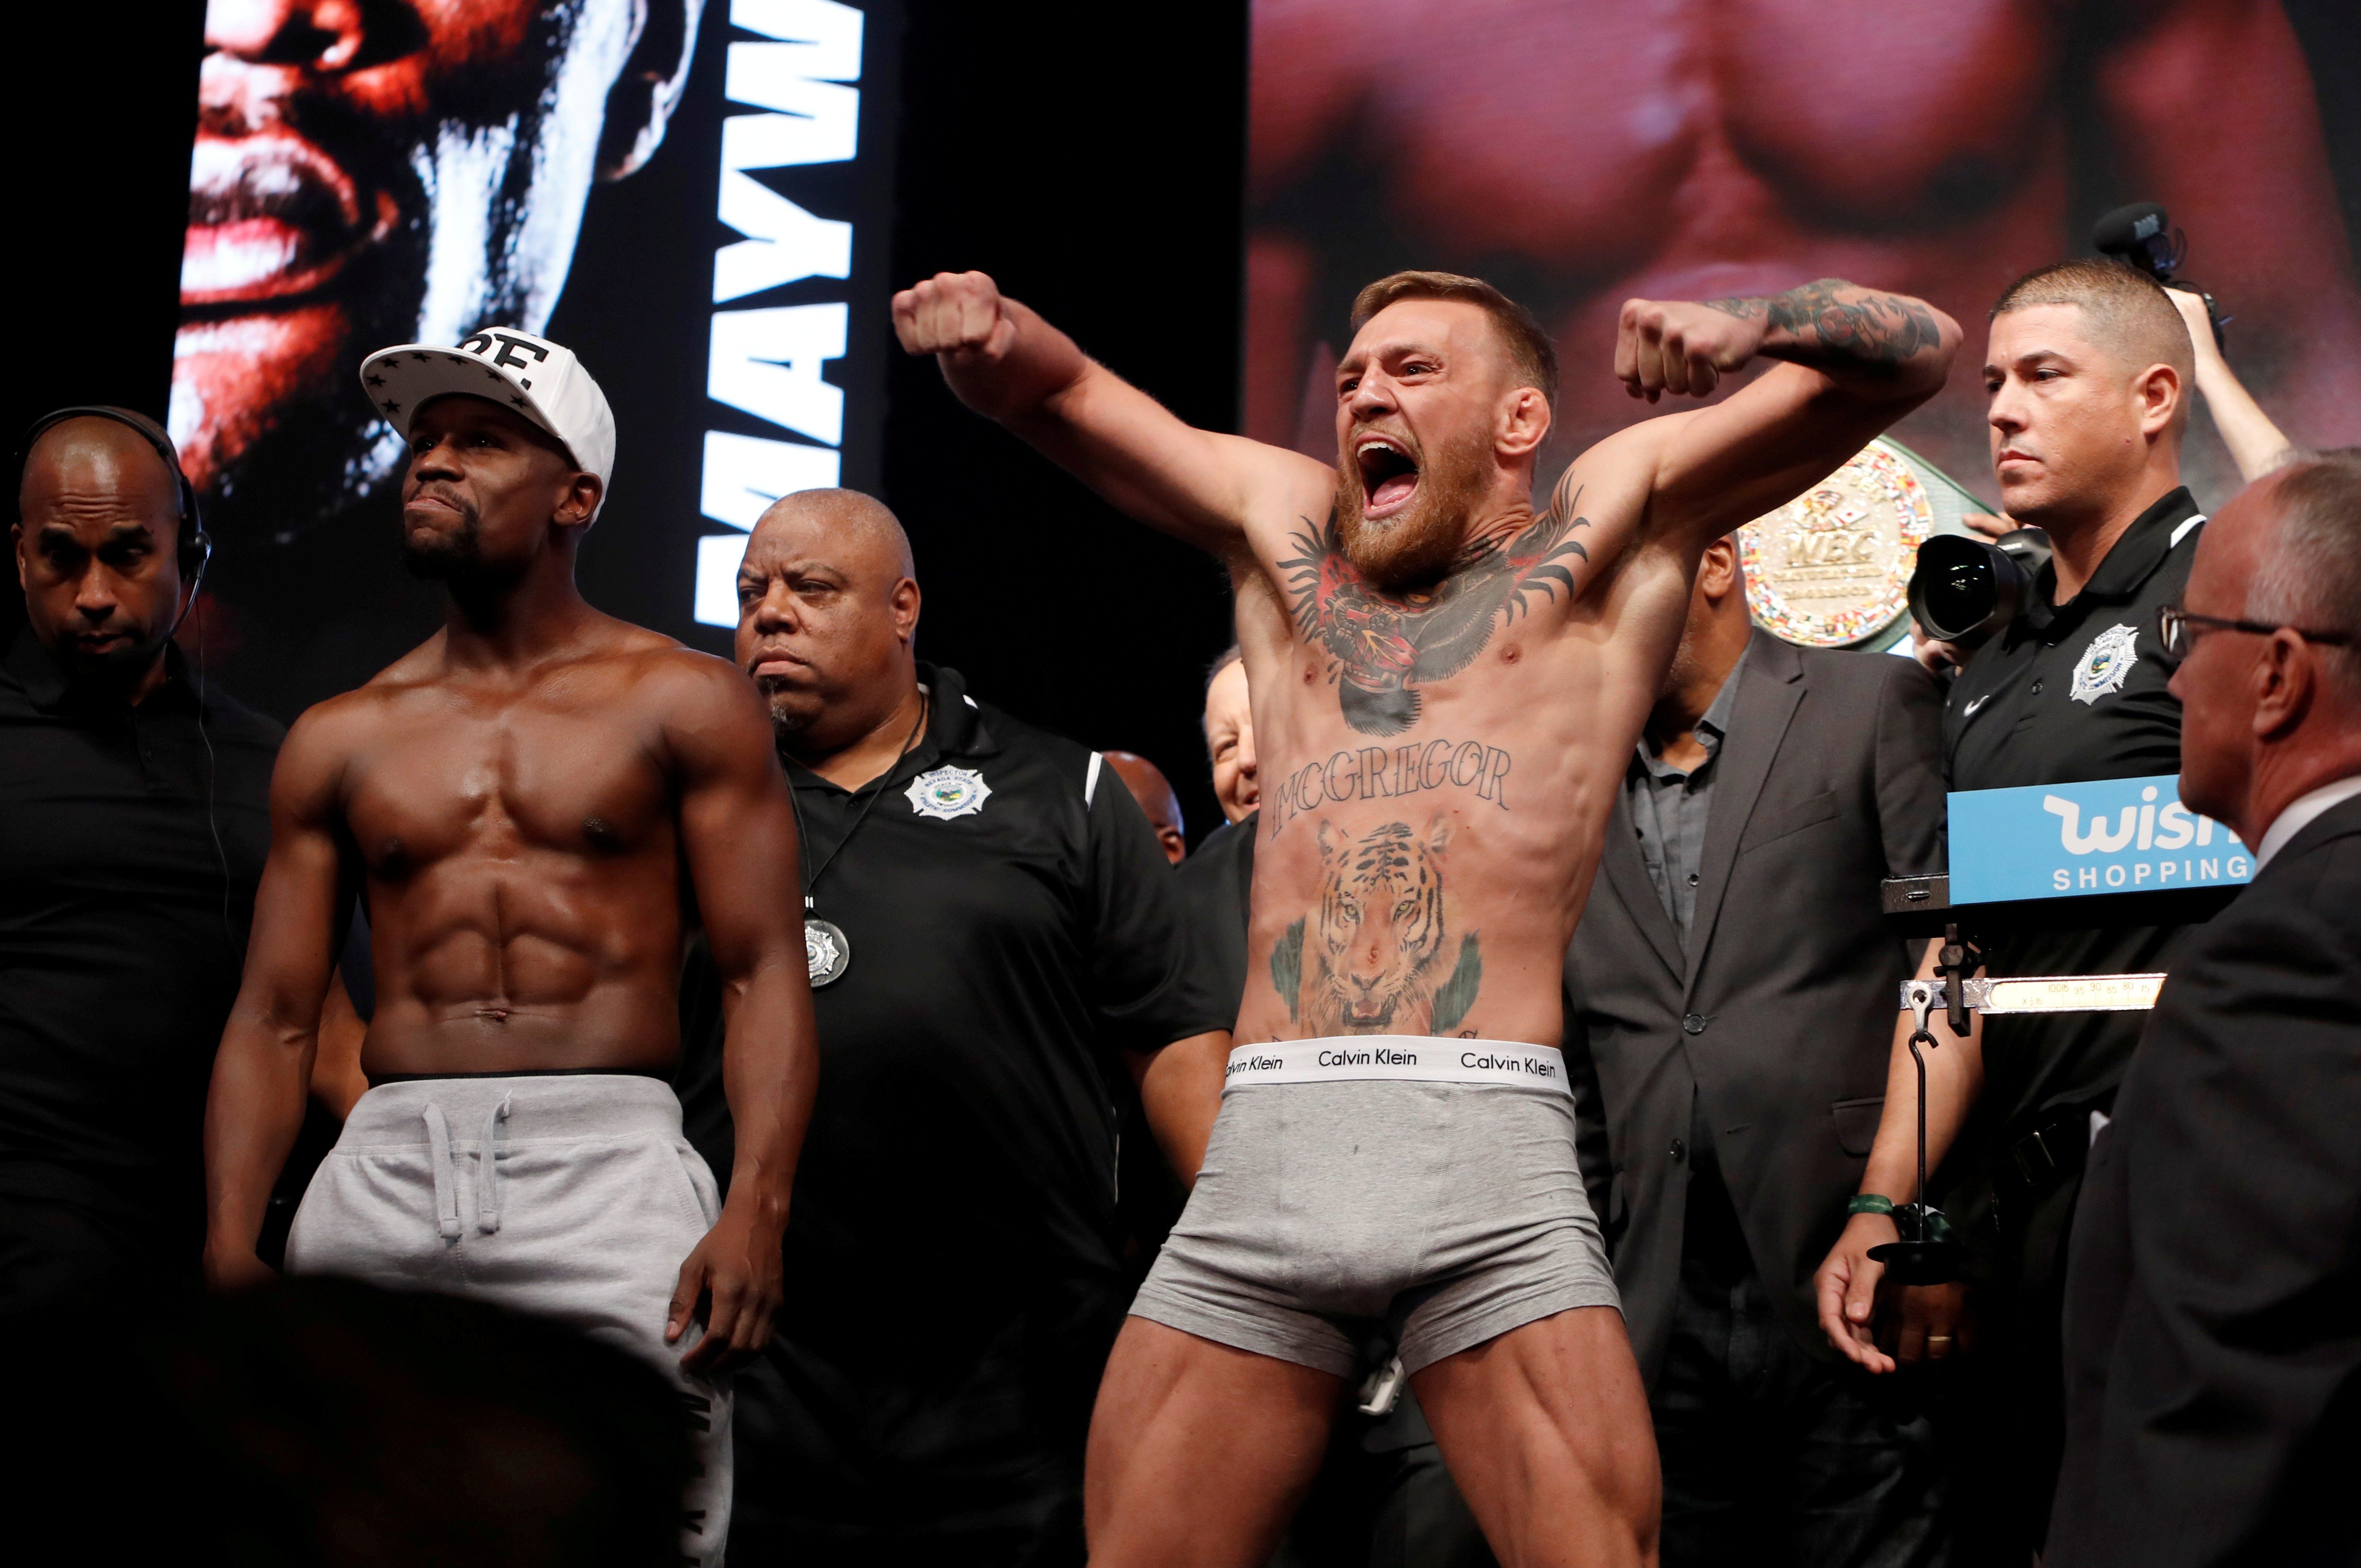 Conor McGregor (right) poses with Floyd Mayweahter before the official weigh-in of their record-breaking boxing superfight in 2017. Photo: Reuters